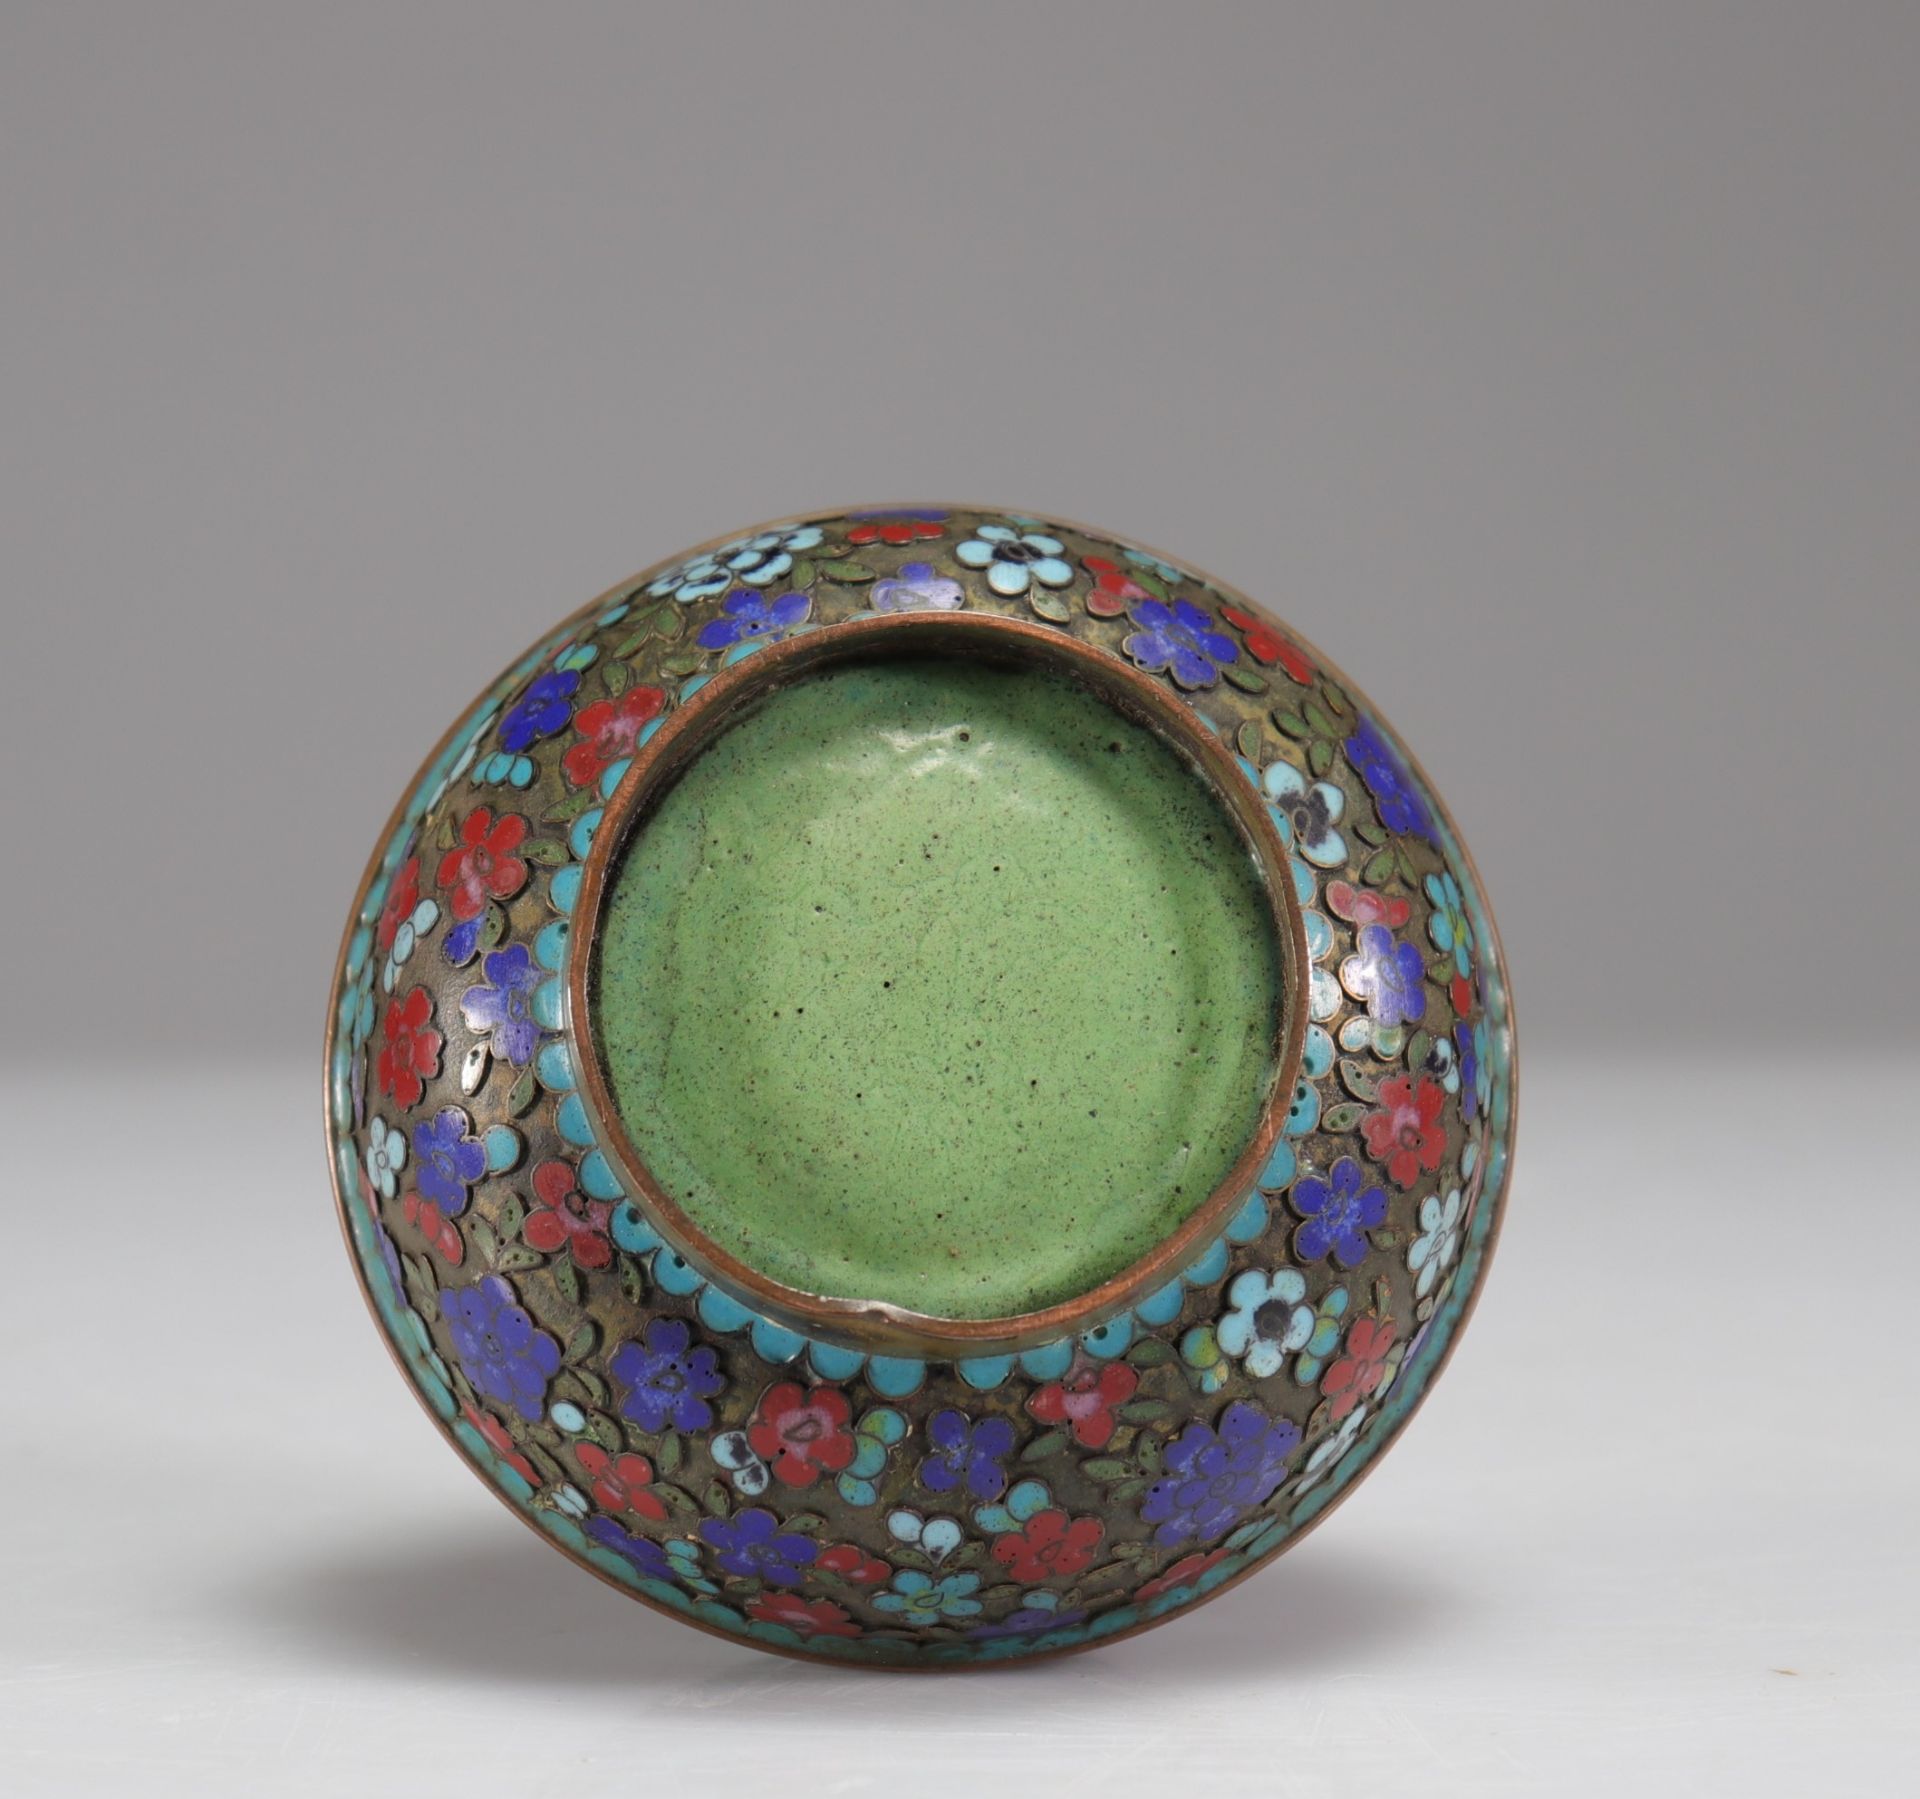 Box covered in cloisonne bonze - Image 4 of 4